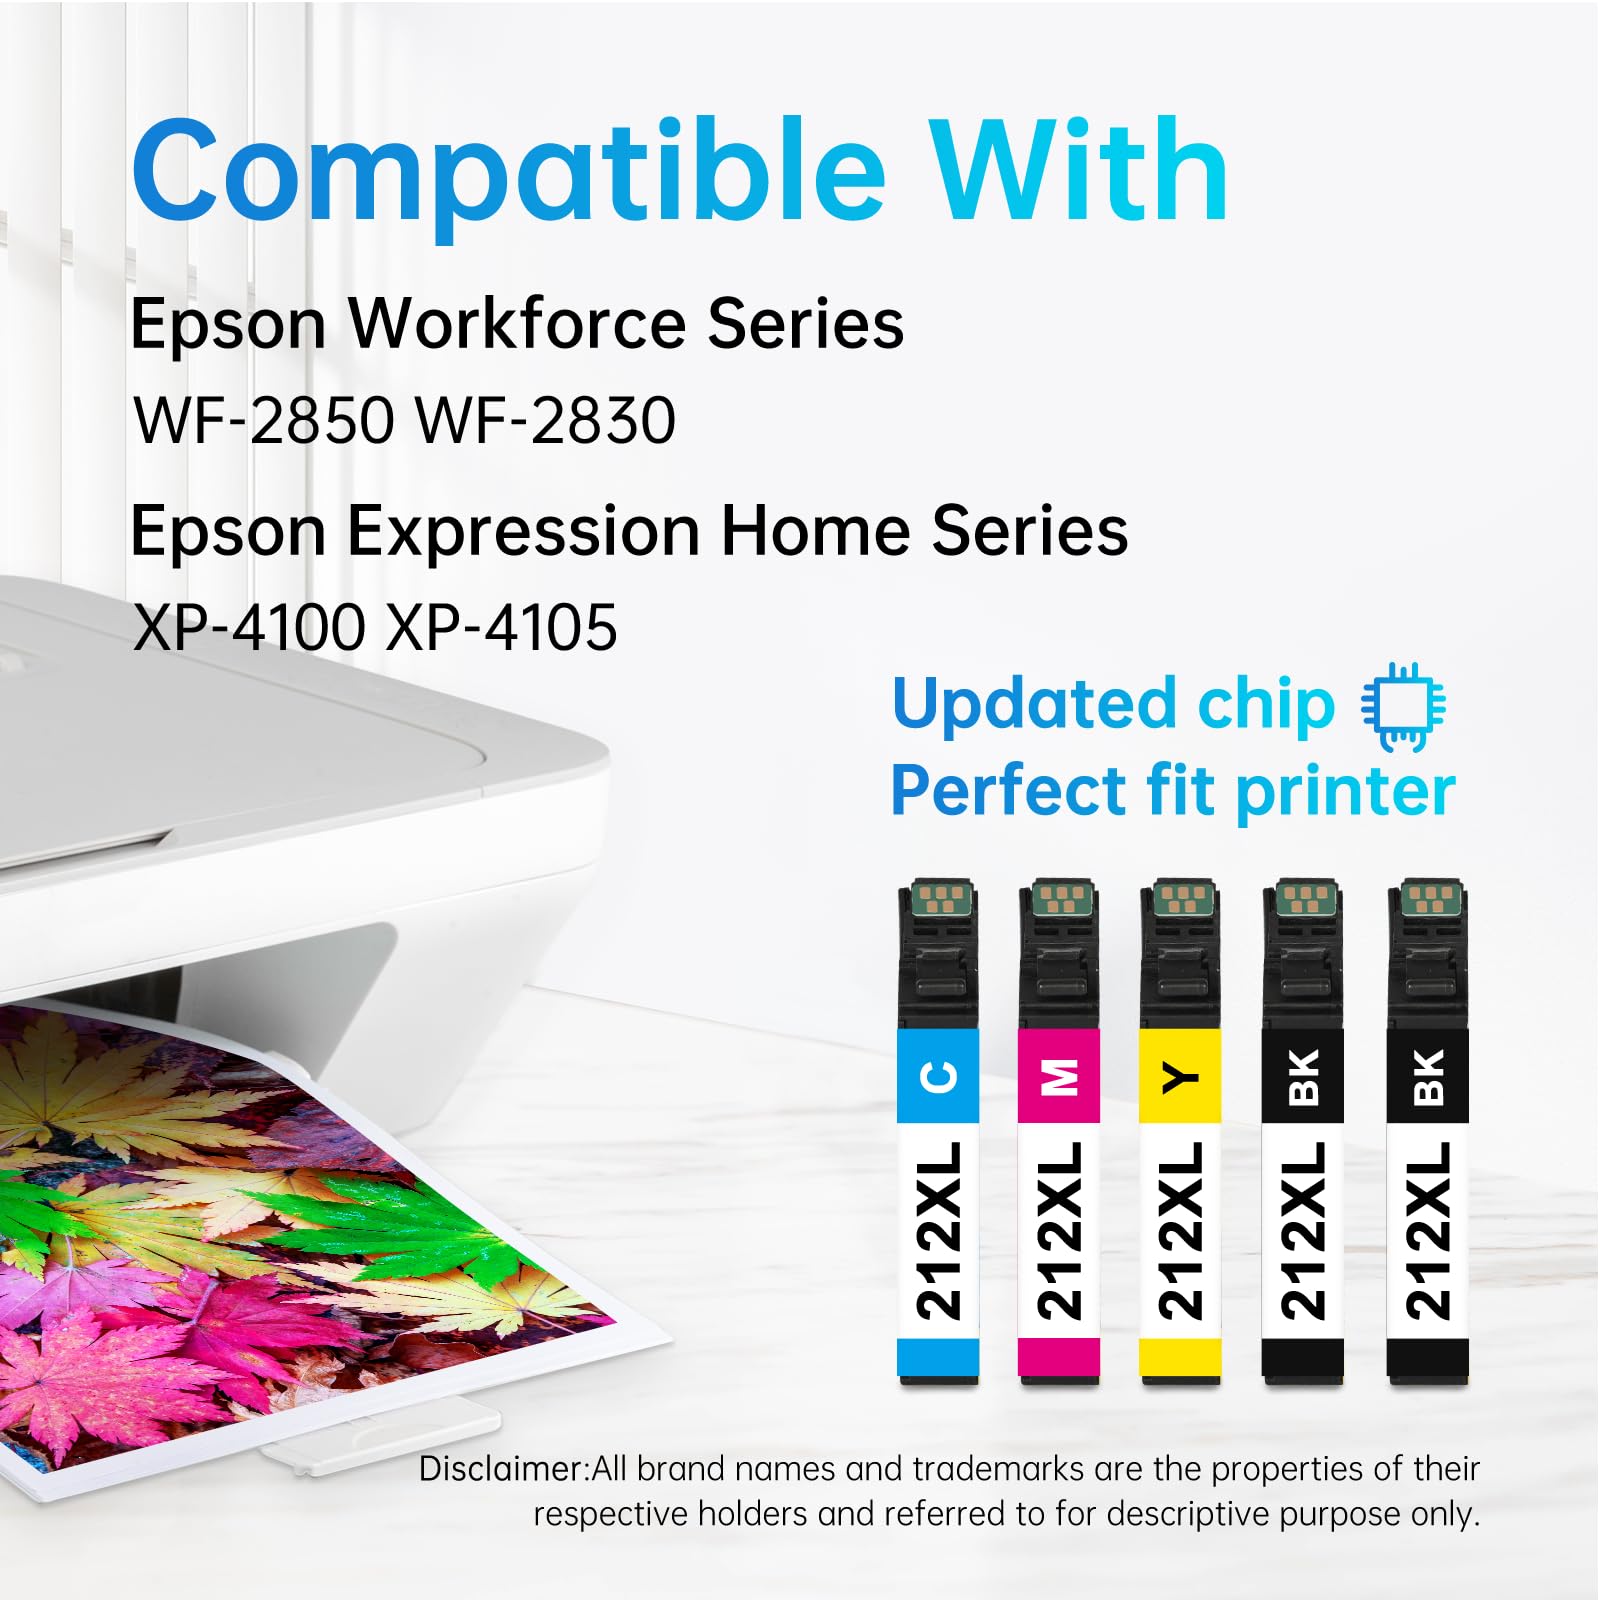 List of Epson printer models compatible with LEMERO 212XL ink cartridges including WorkForce and Expression Home series.